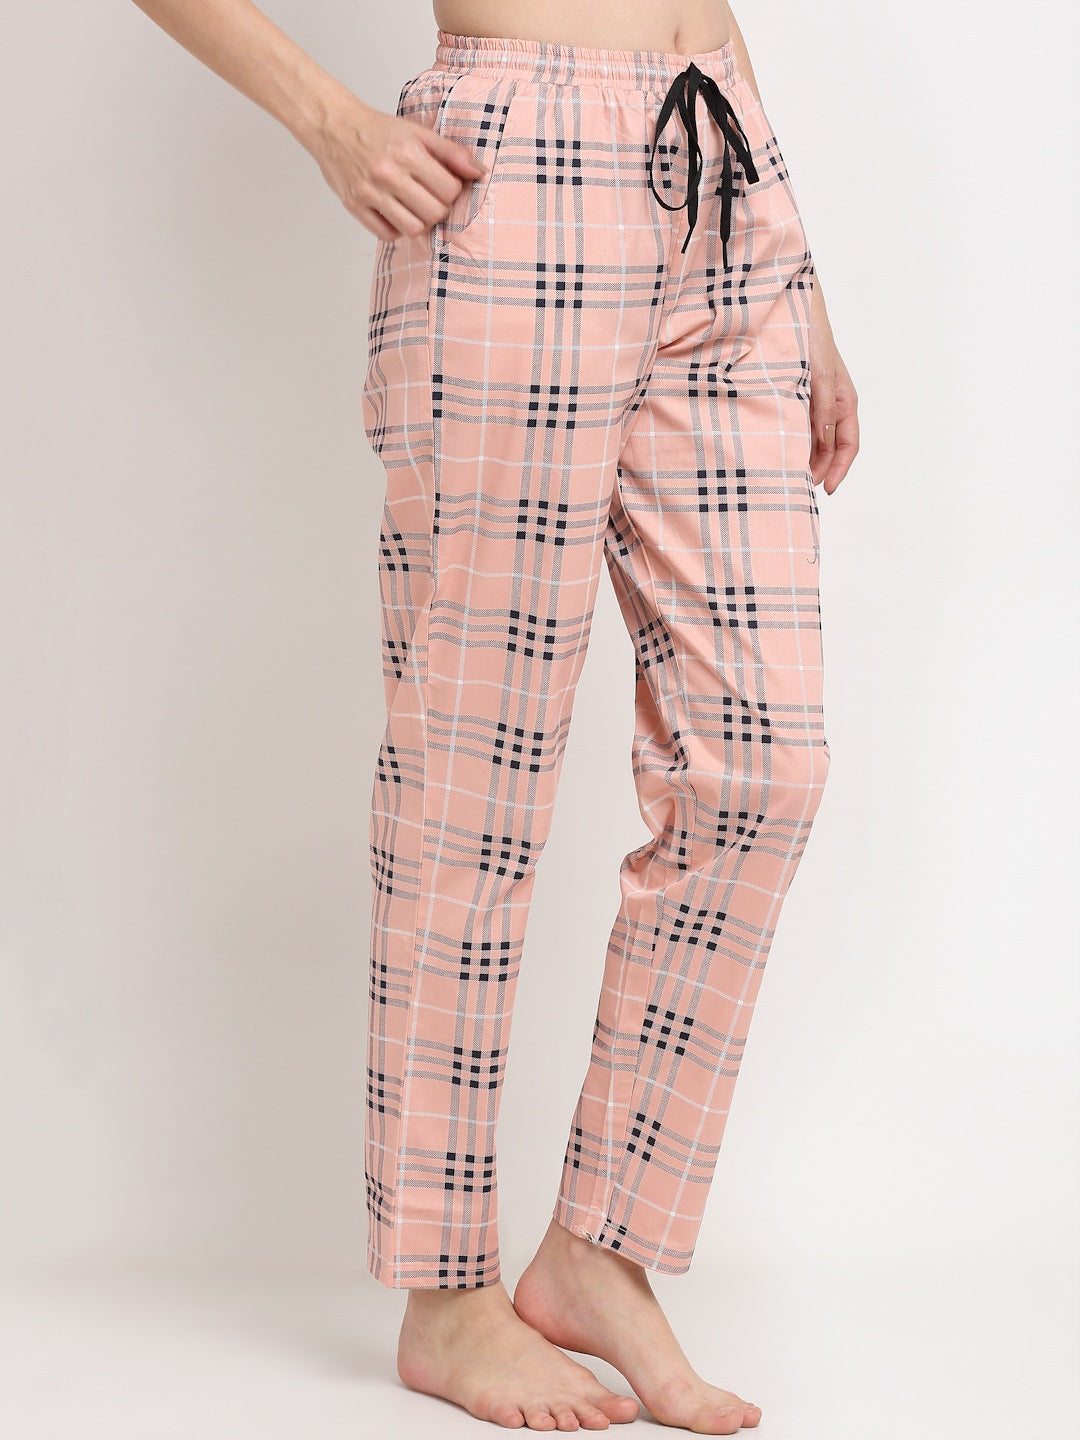 Peach Colour Abstract Printed Cotton Lounge Pants Claura Designs Pvt. Ltd. Nightsuit Abstract Printed, Cotton, Lounge Pant, Loungepant_size, Pajama, peach color, Printed, Rayon